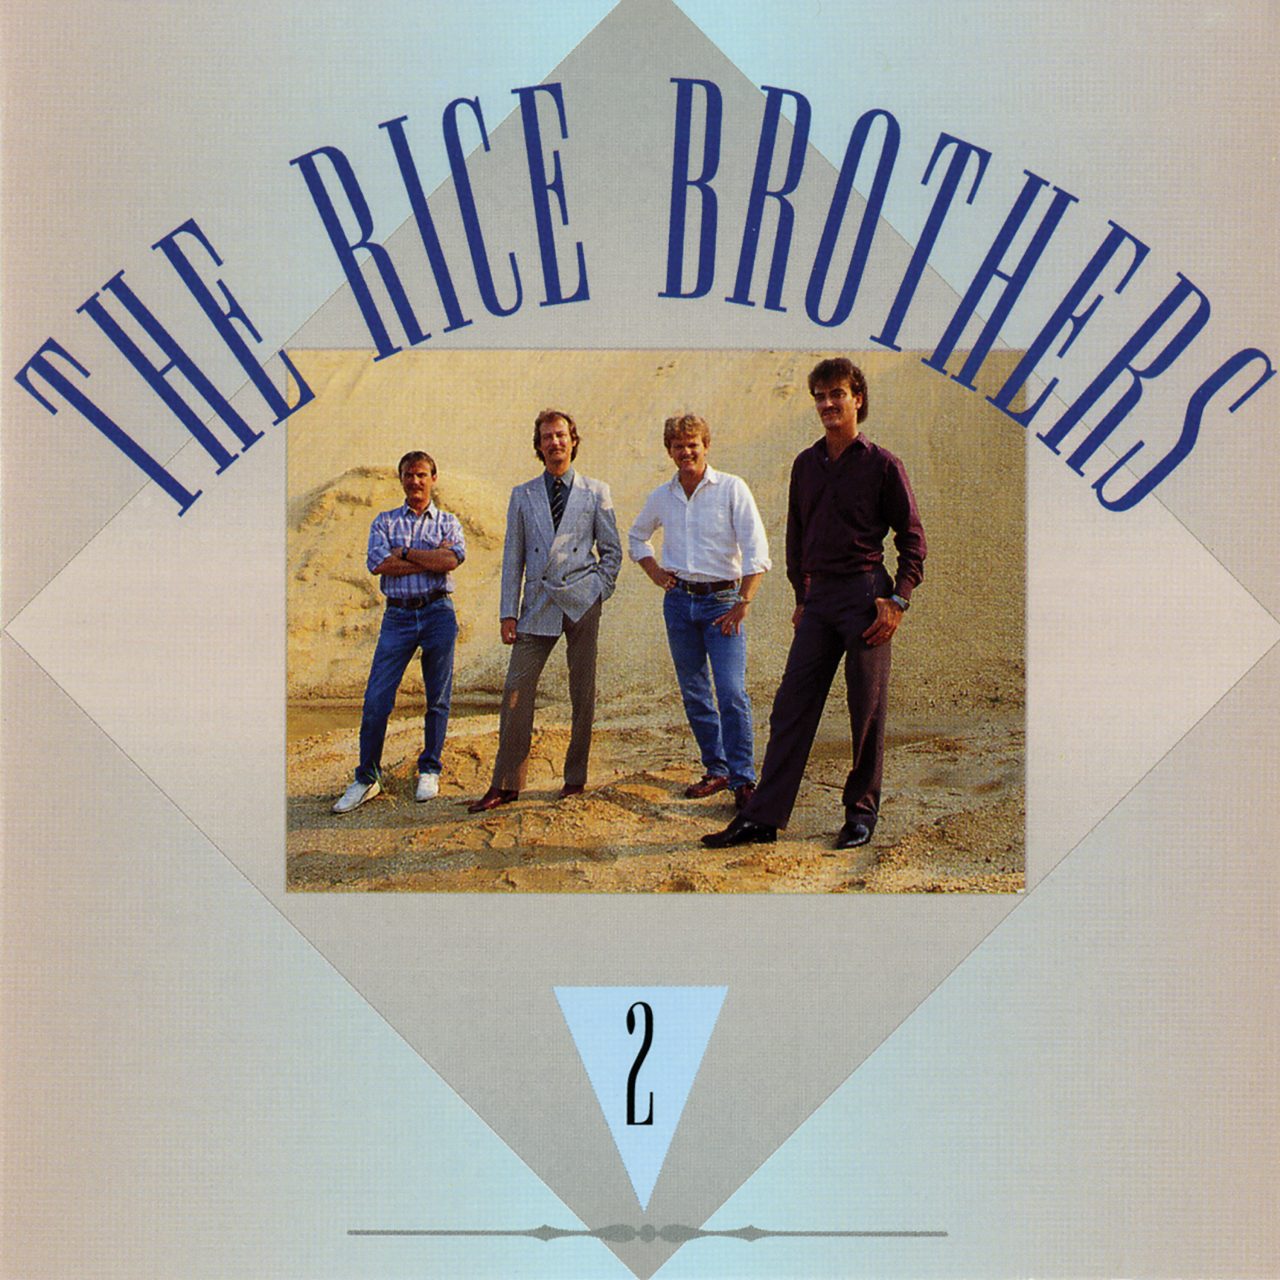 Rice Brothers – 2 cover album